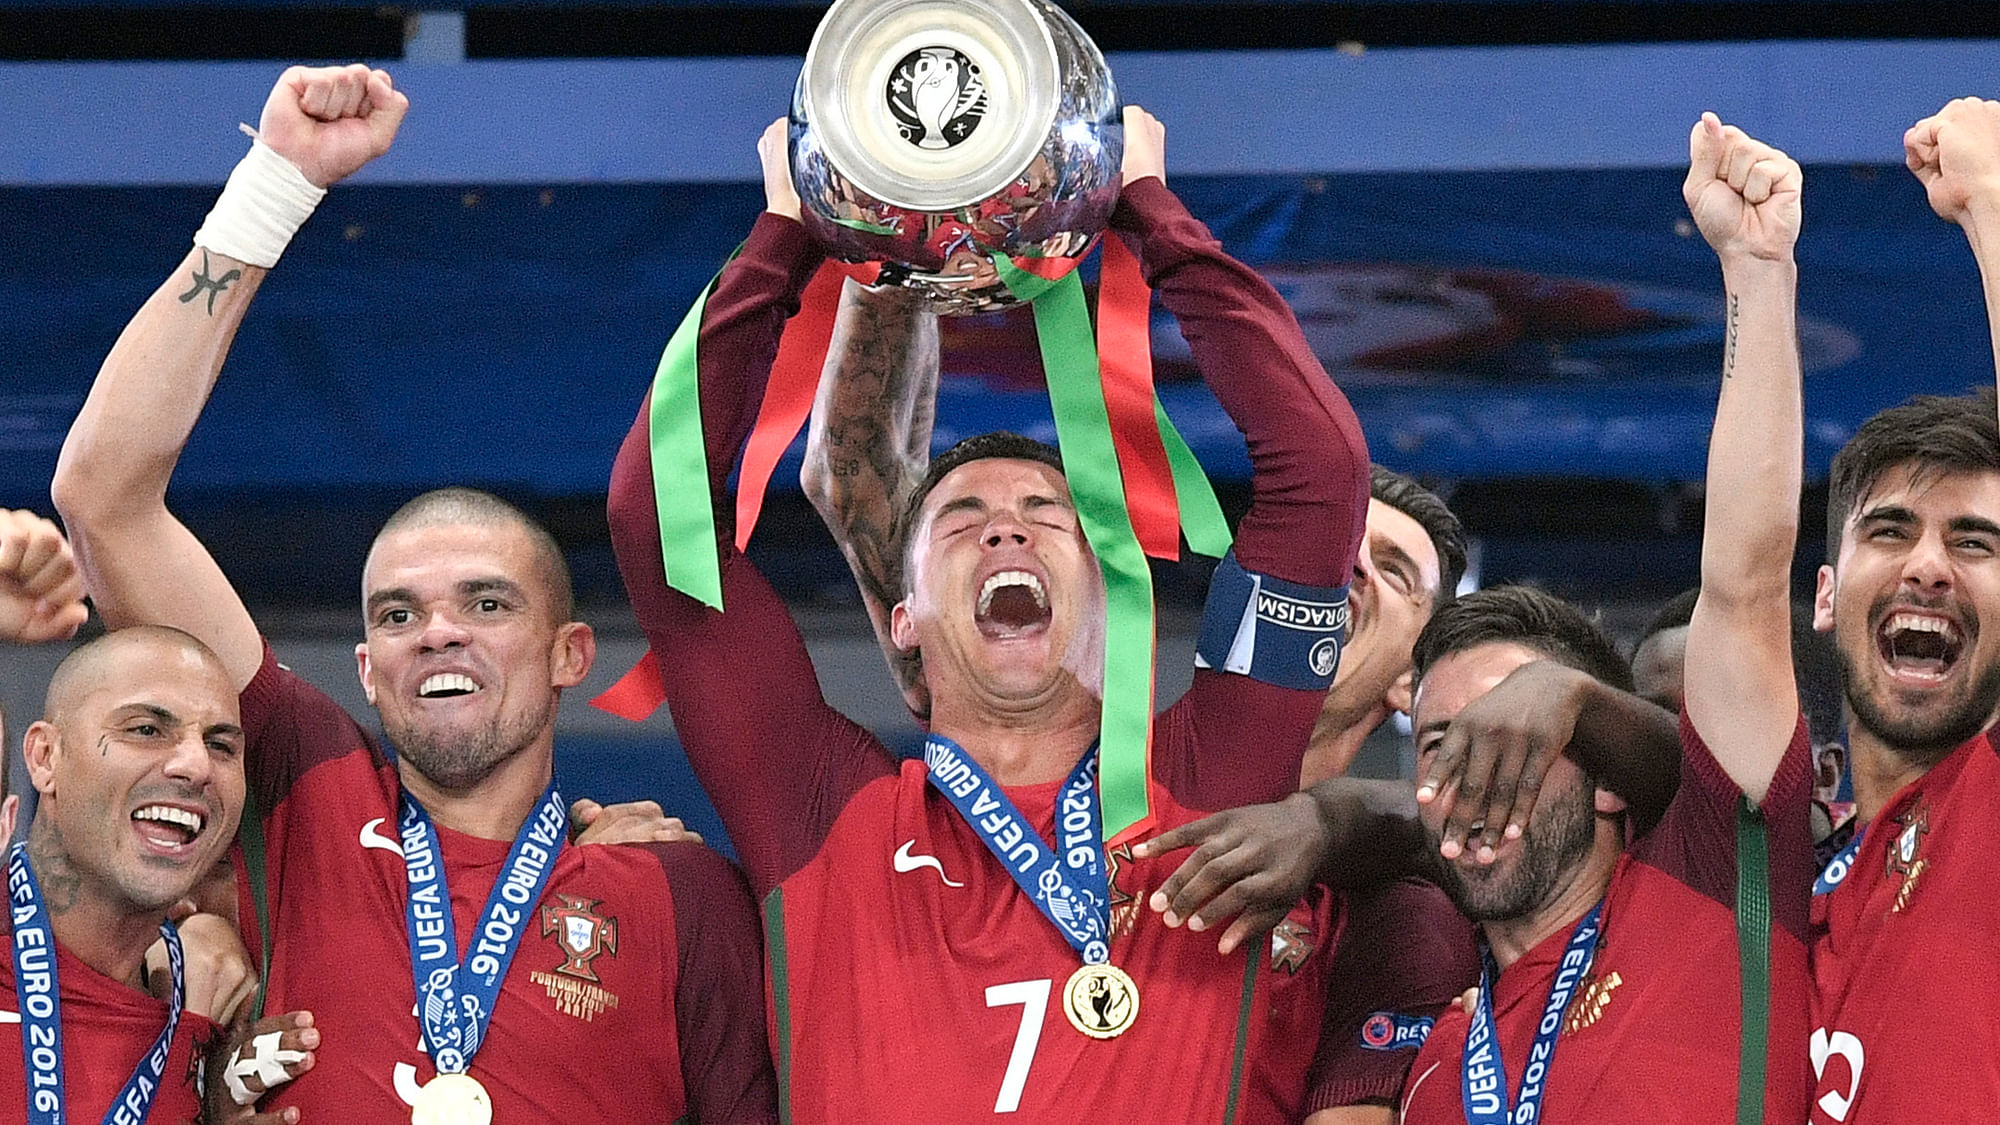  July 10, 2016: Portugal’s Cristiano Ronaldo holds the trophy at the end of the Euro 2016 final soccer match between Portugal and France at the Stade de France in Saint-Denis, north of Paris.&nbsp;